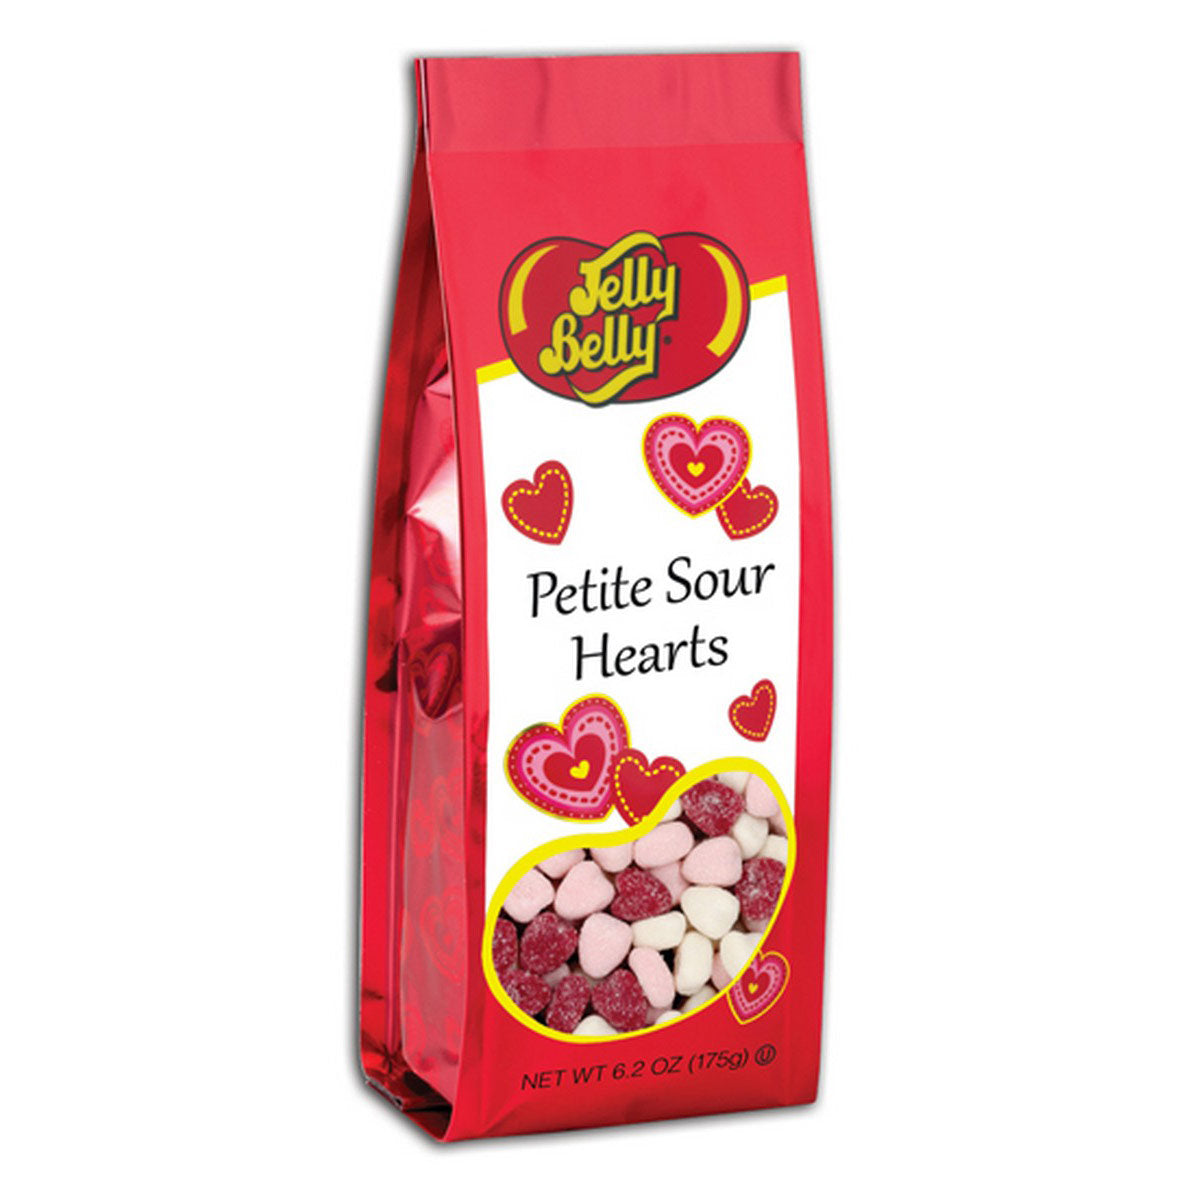 JELLY BELLY: Petite Sour Hearts Gift Bag, 6.2 oz - Vending Business Solutions